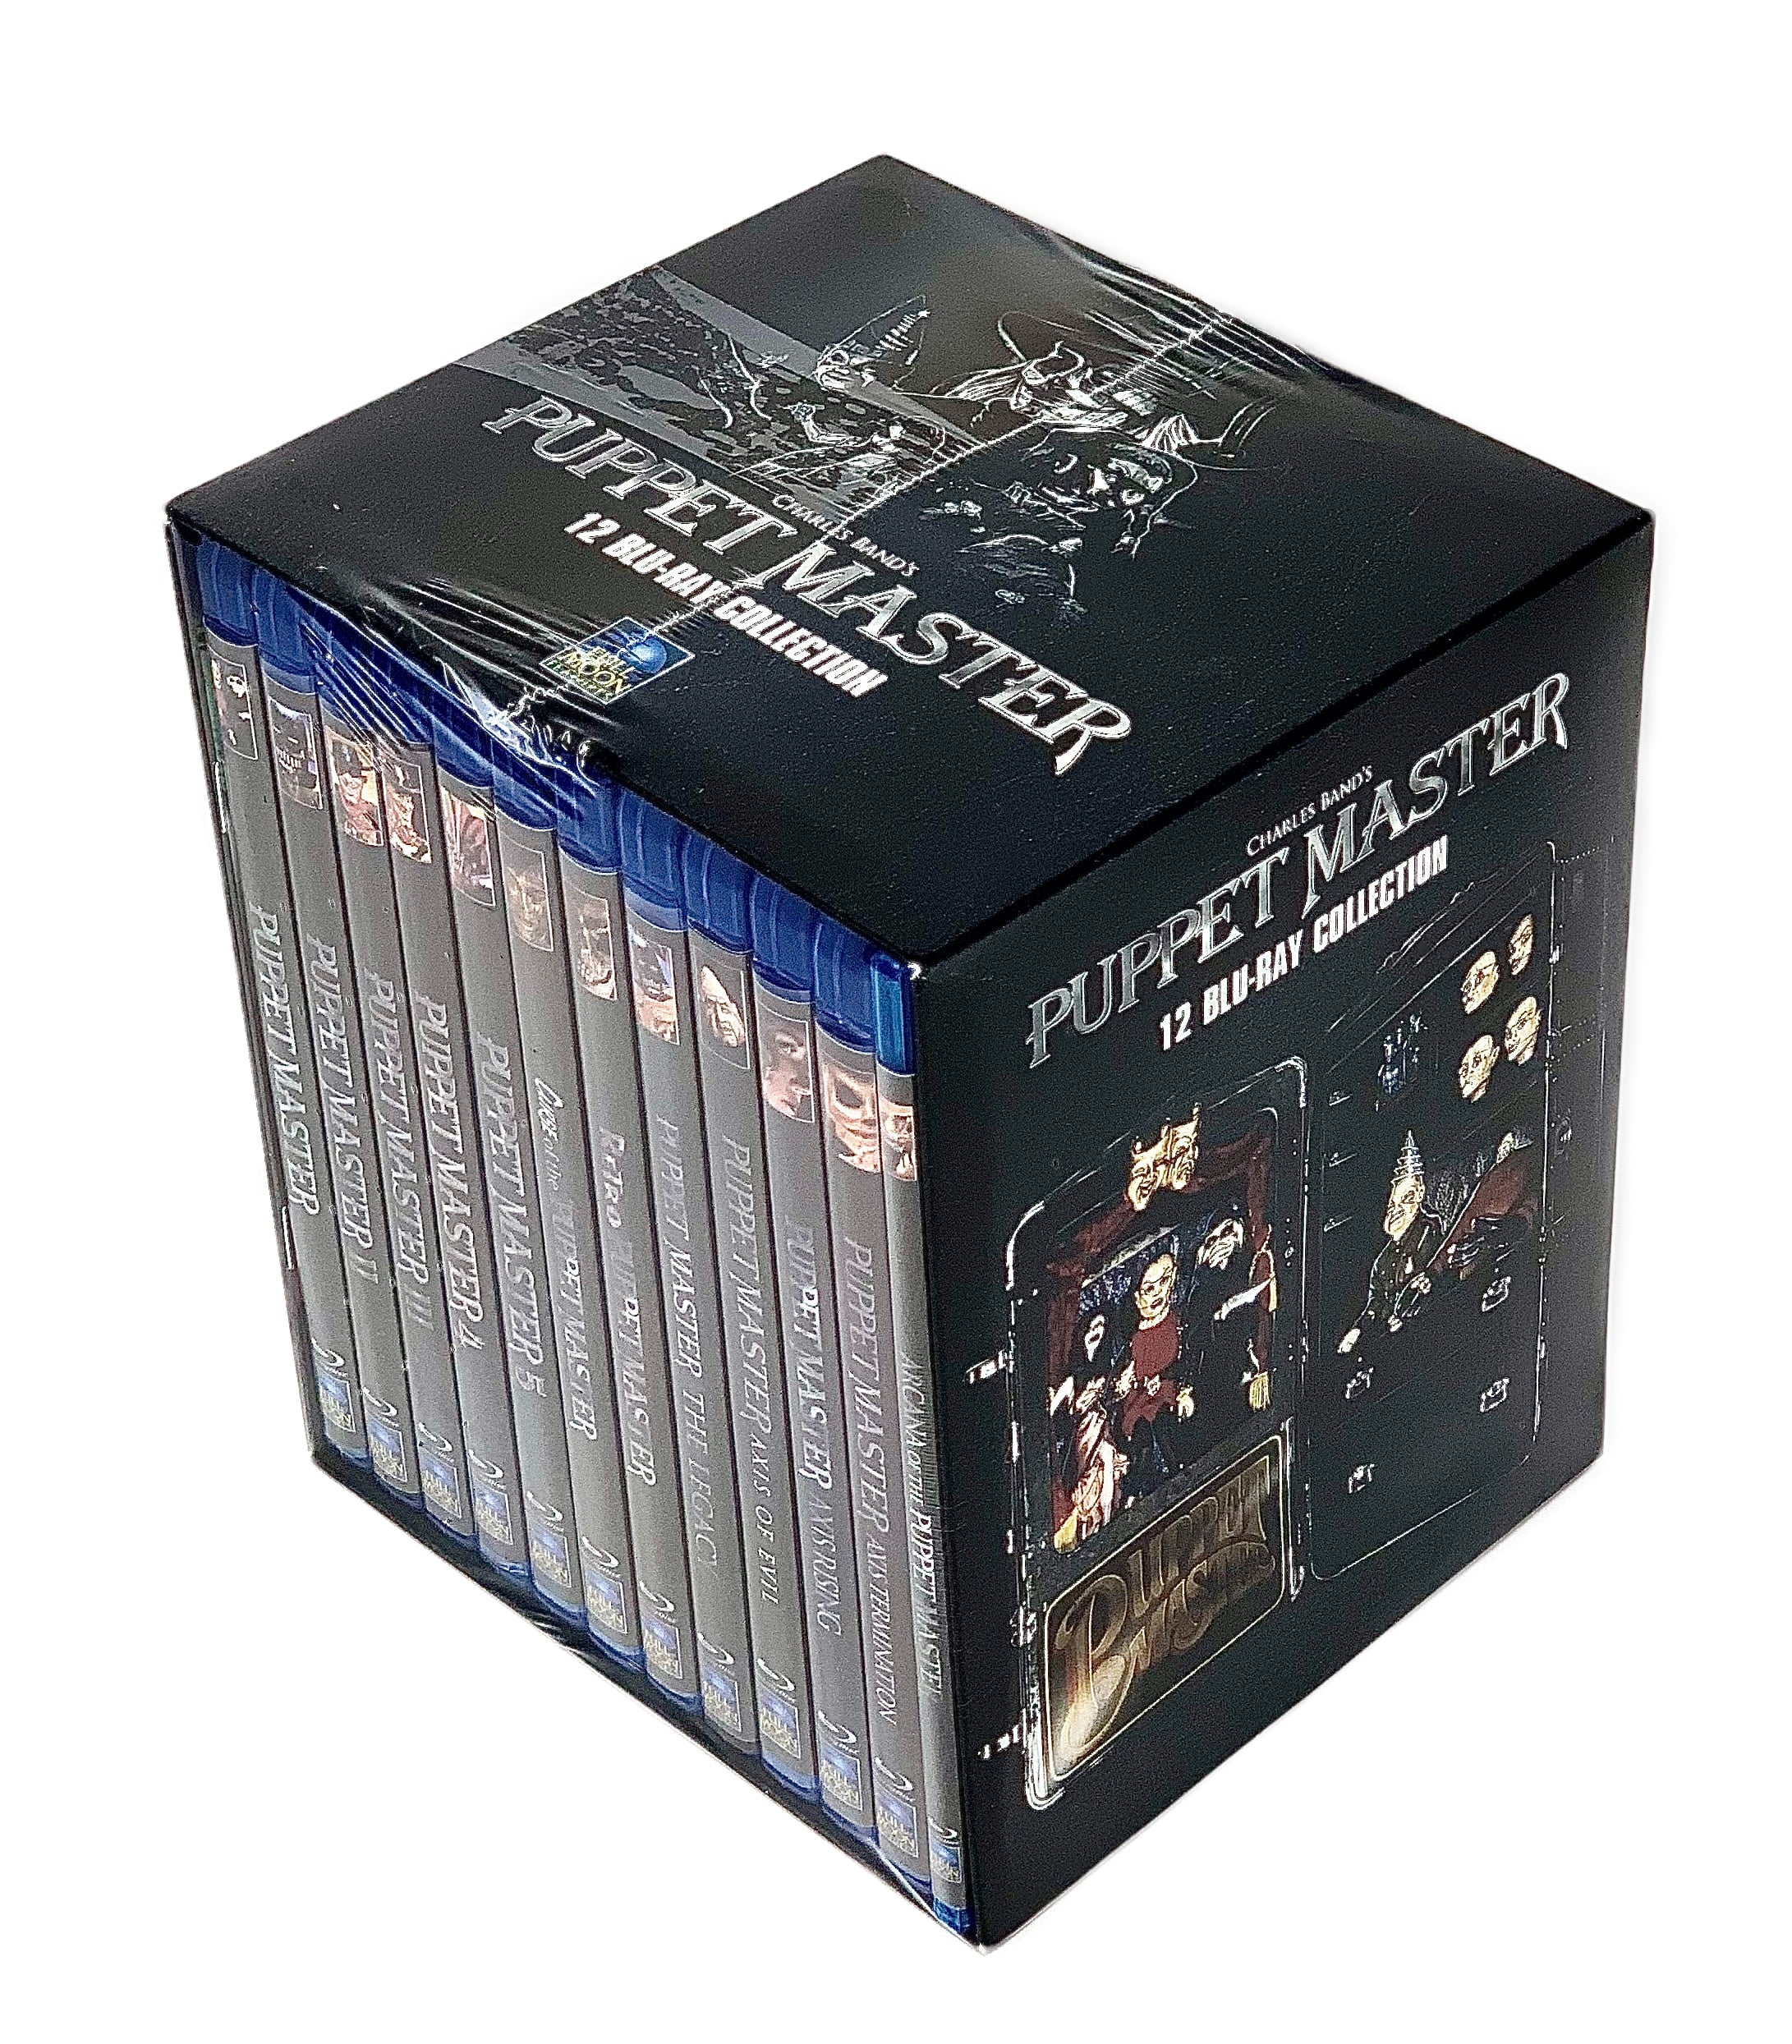 Buy Puppet Master 12 Disc Collection Box Set Blu-ray Online in Ghana.  459950003